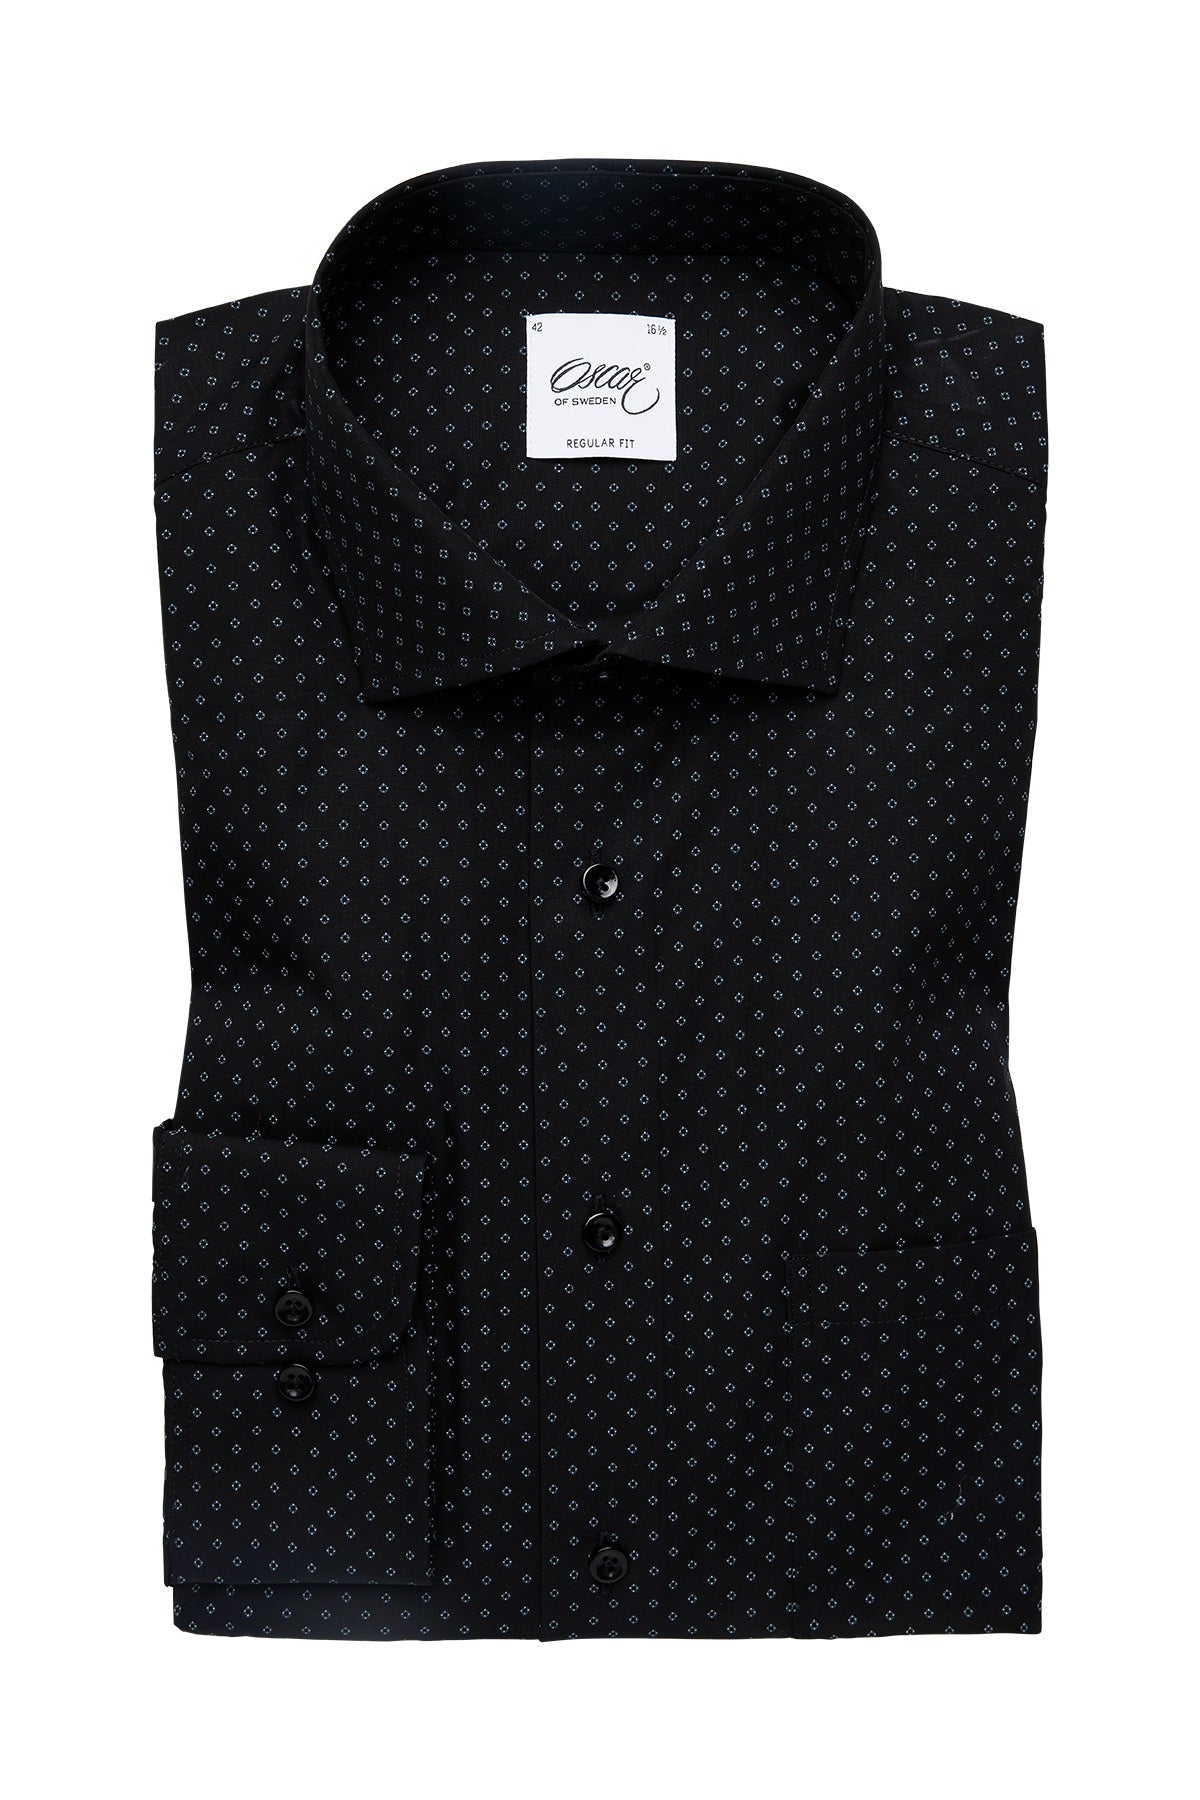 Black regular fit shirt with small flower print